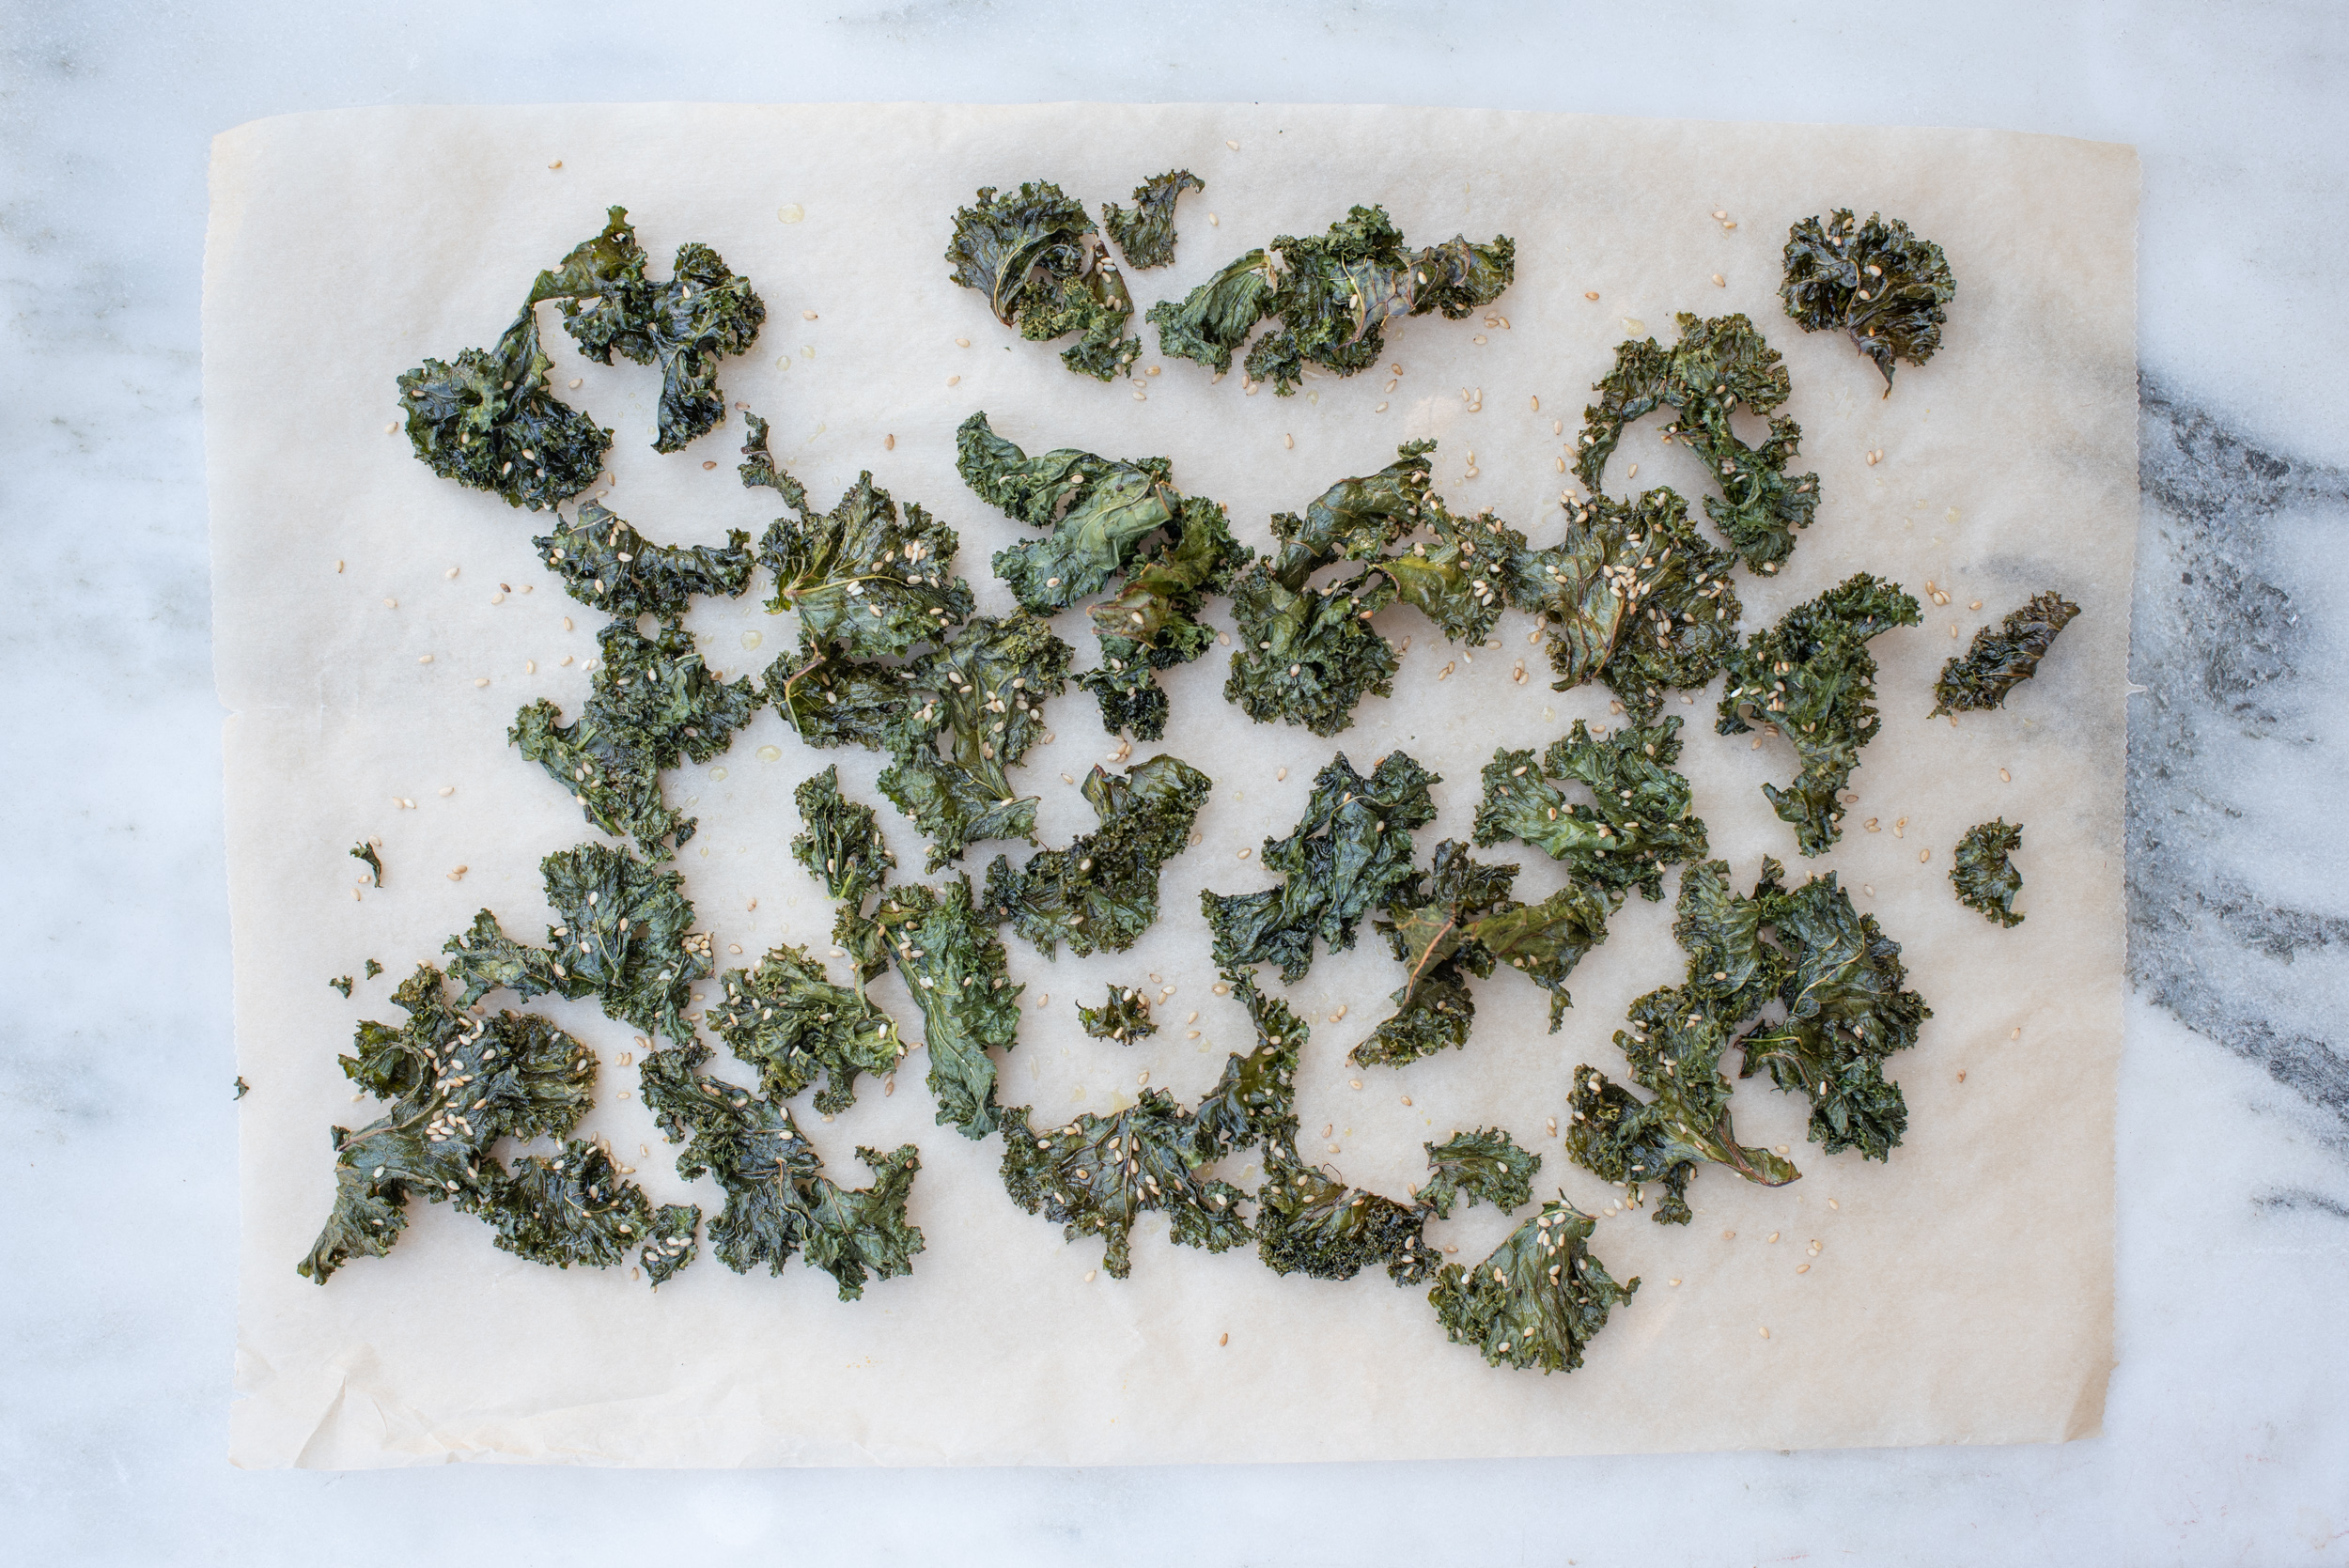 kale chips on a piece of parchment paper laid on a white marble surface